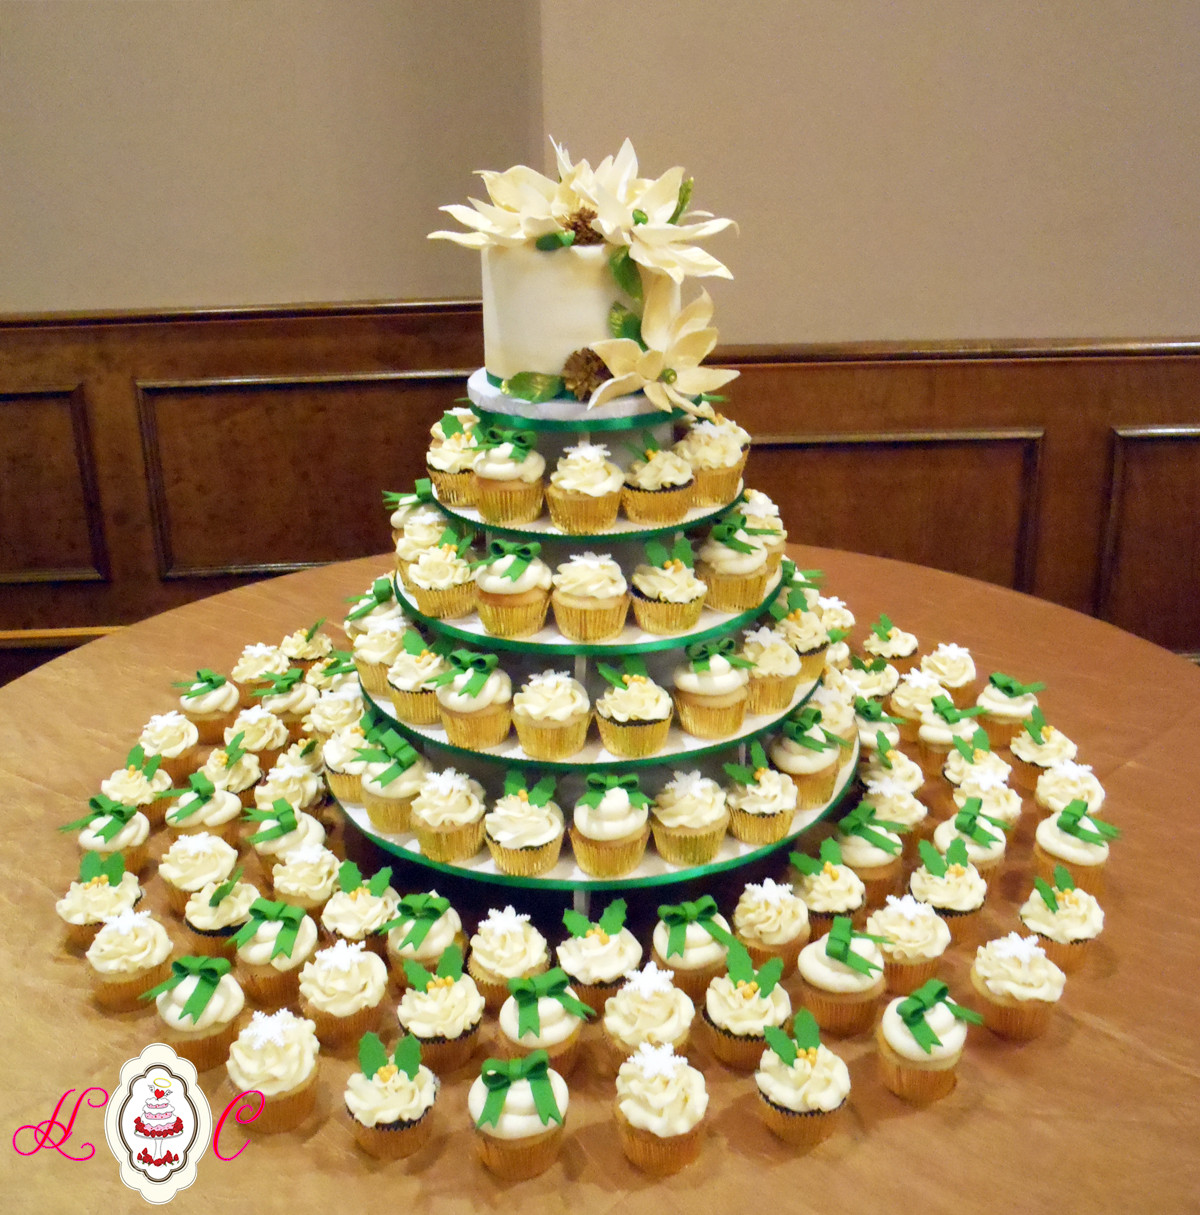 Cup Cake Wedding Cakes
 Wedding Cakes in Marietta Parkersburg & More Heavenly